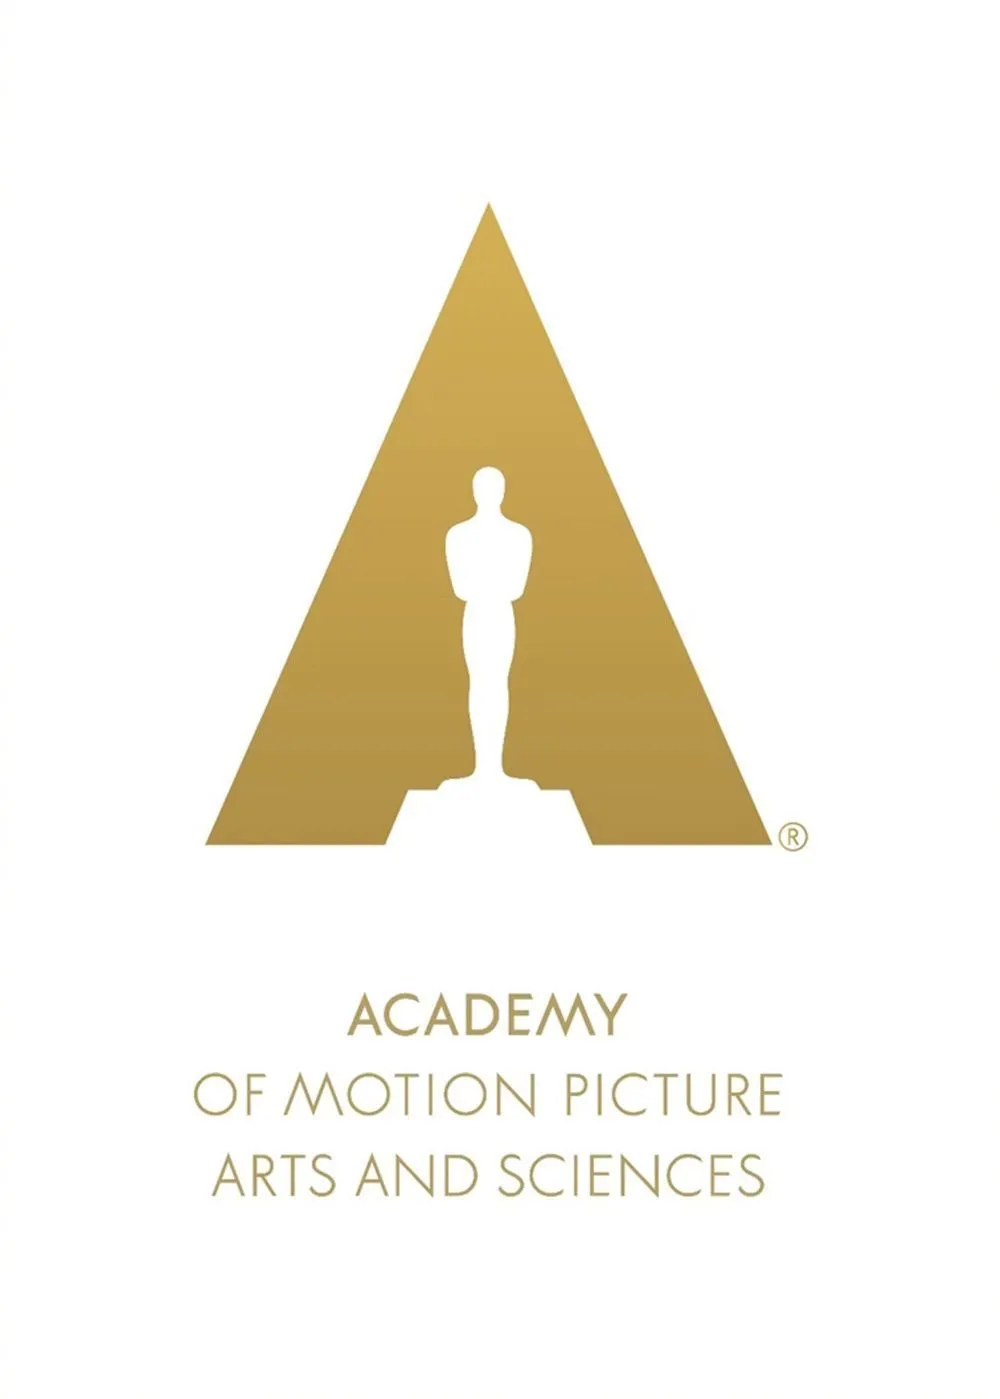 Producer Janet Yang voted as new president of Oscar organizers | FMV6